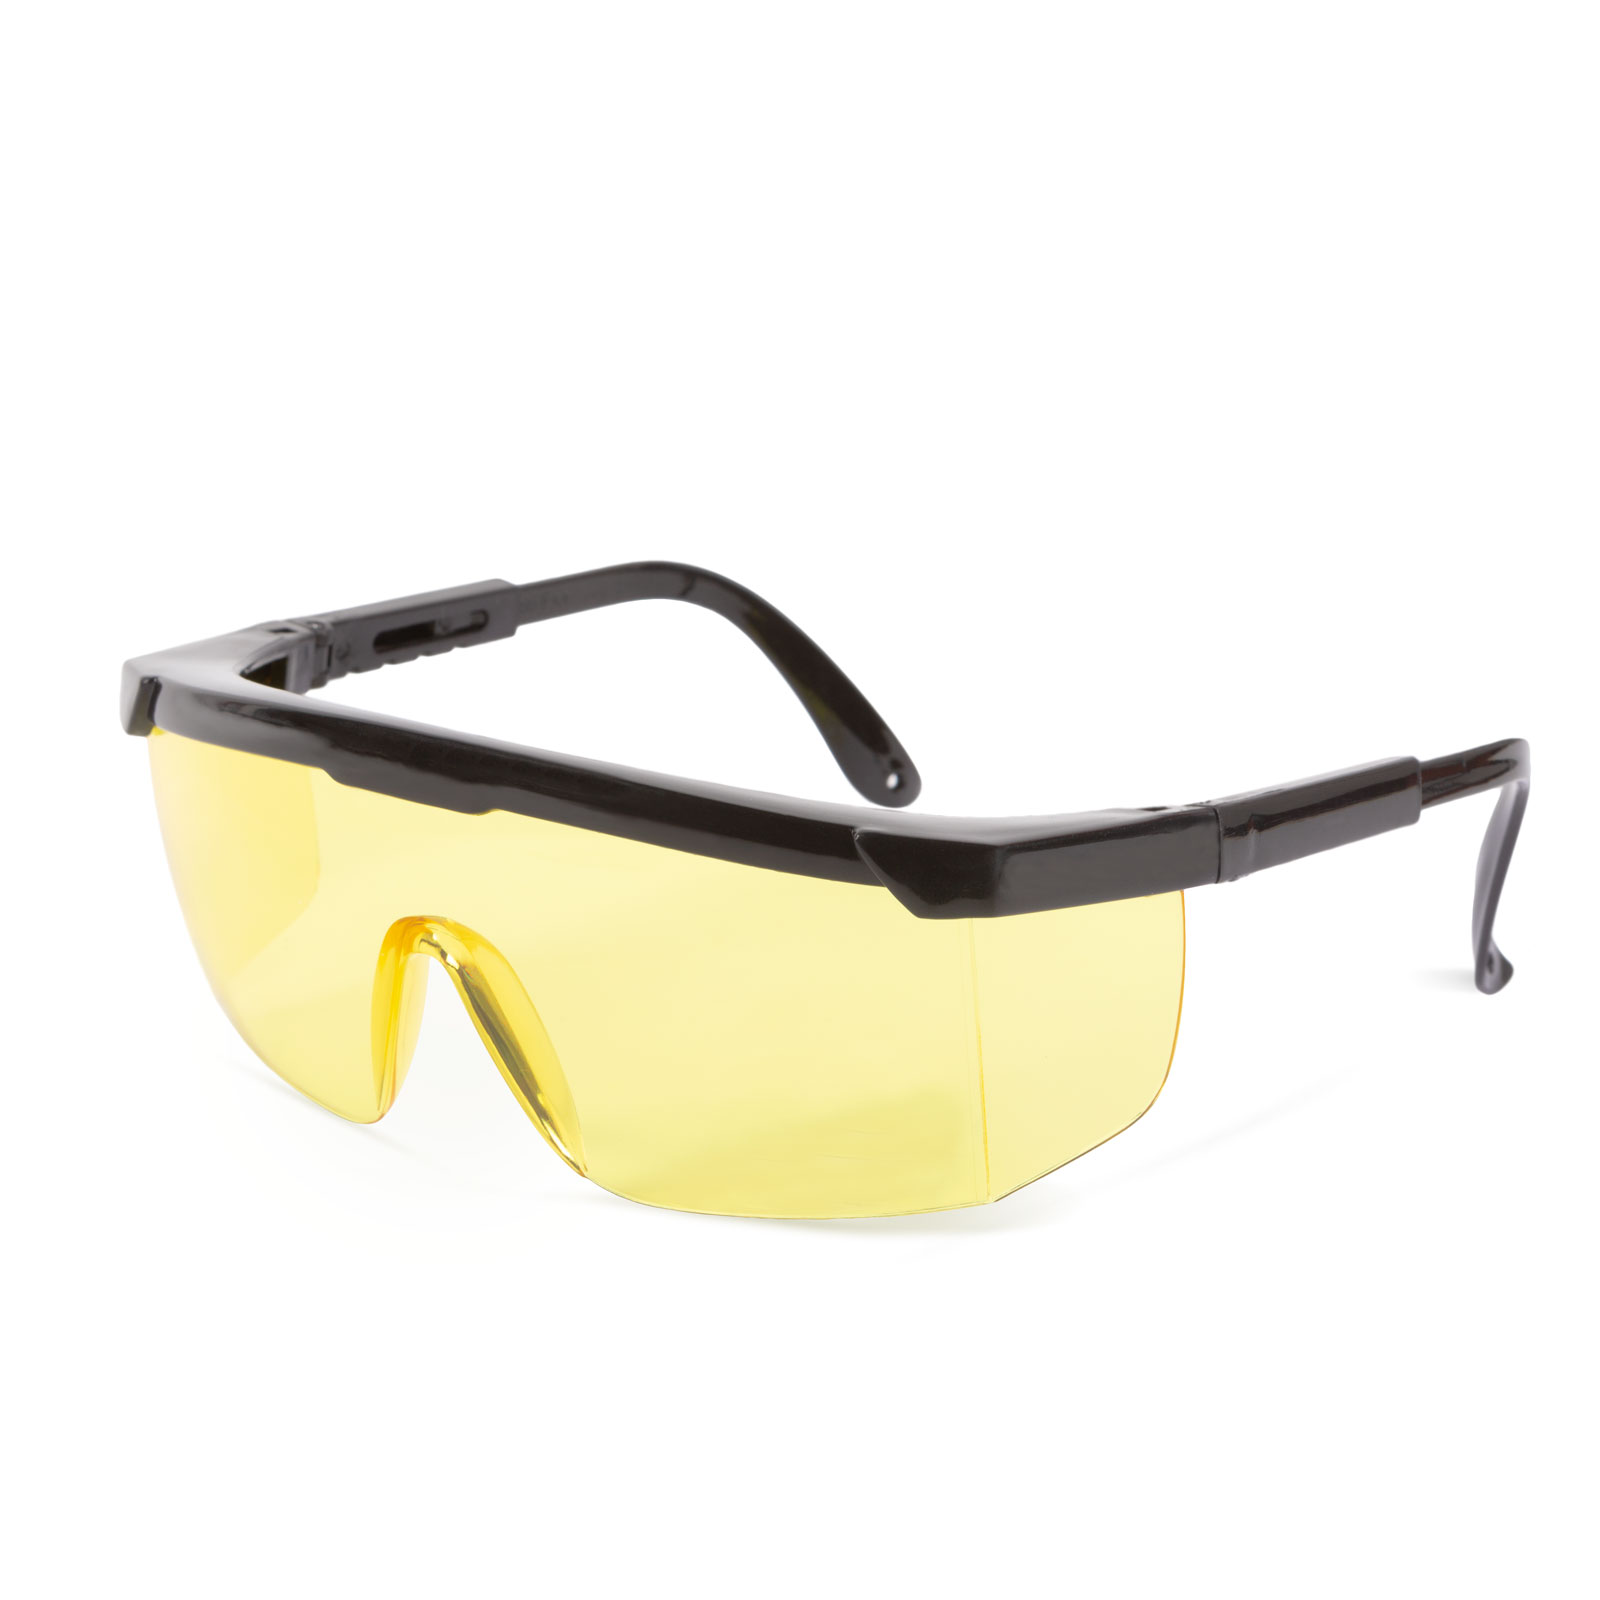 Professional goggles for people with glasses ,UV protection - yellow thumb